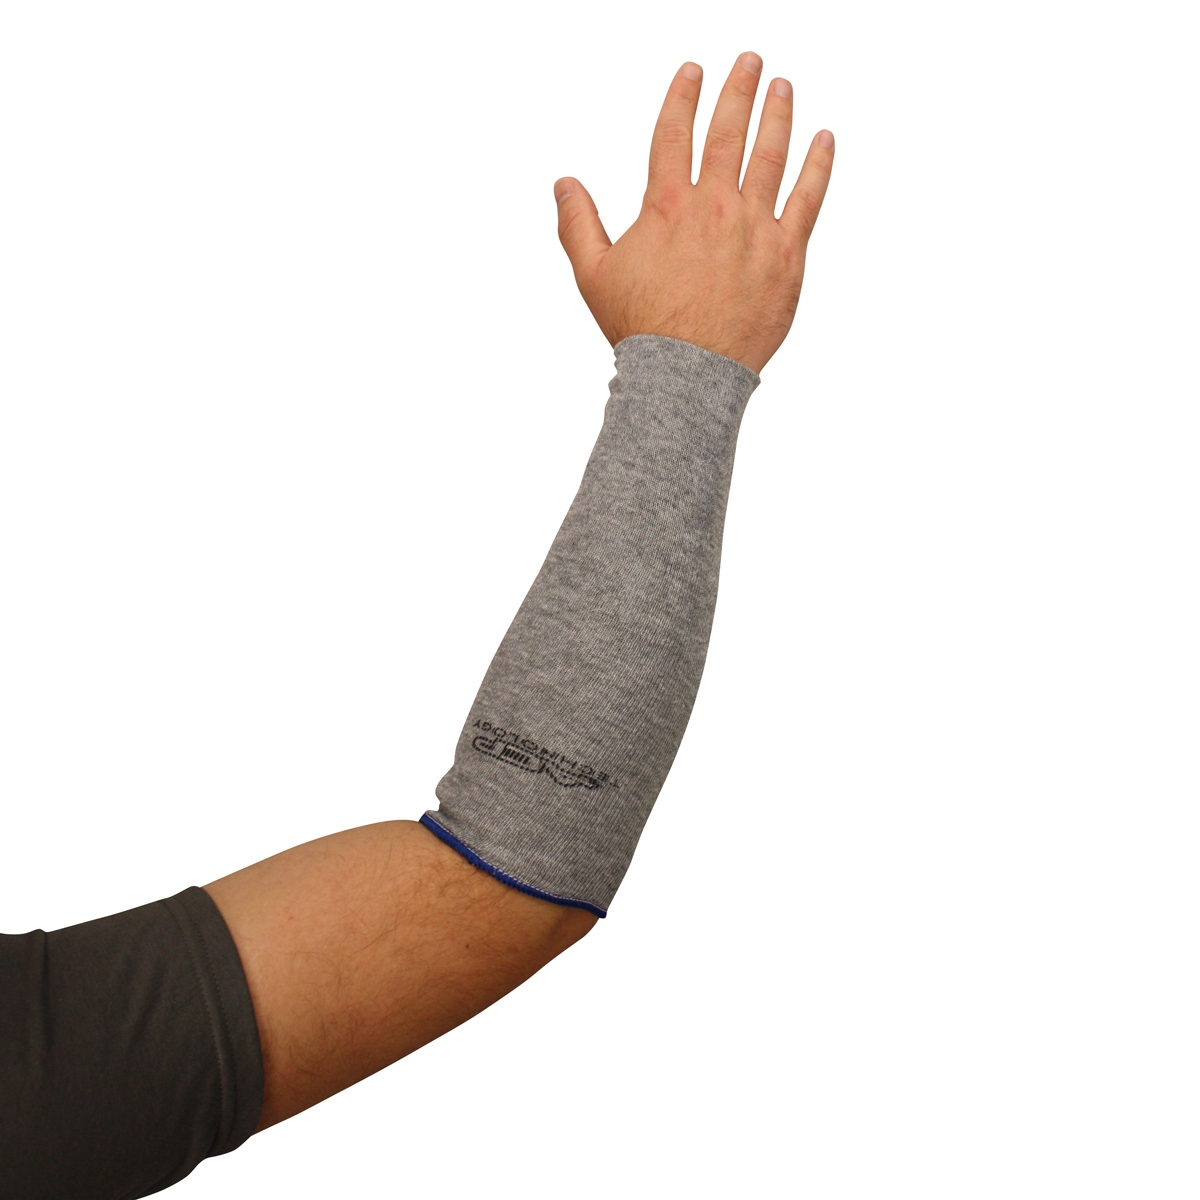 PIP® One Size Fits Most Gray 2-Ply ACP Dyneema® Blended Cut Resistant Sleeve